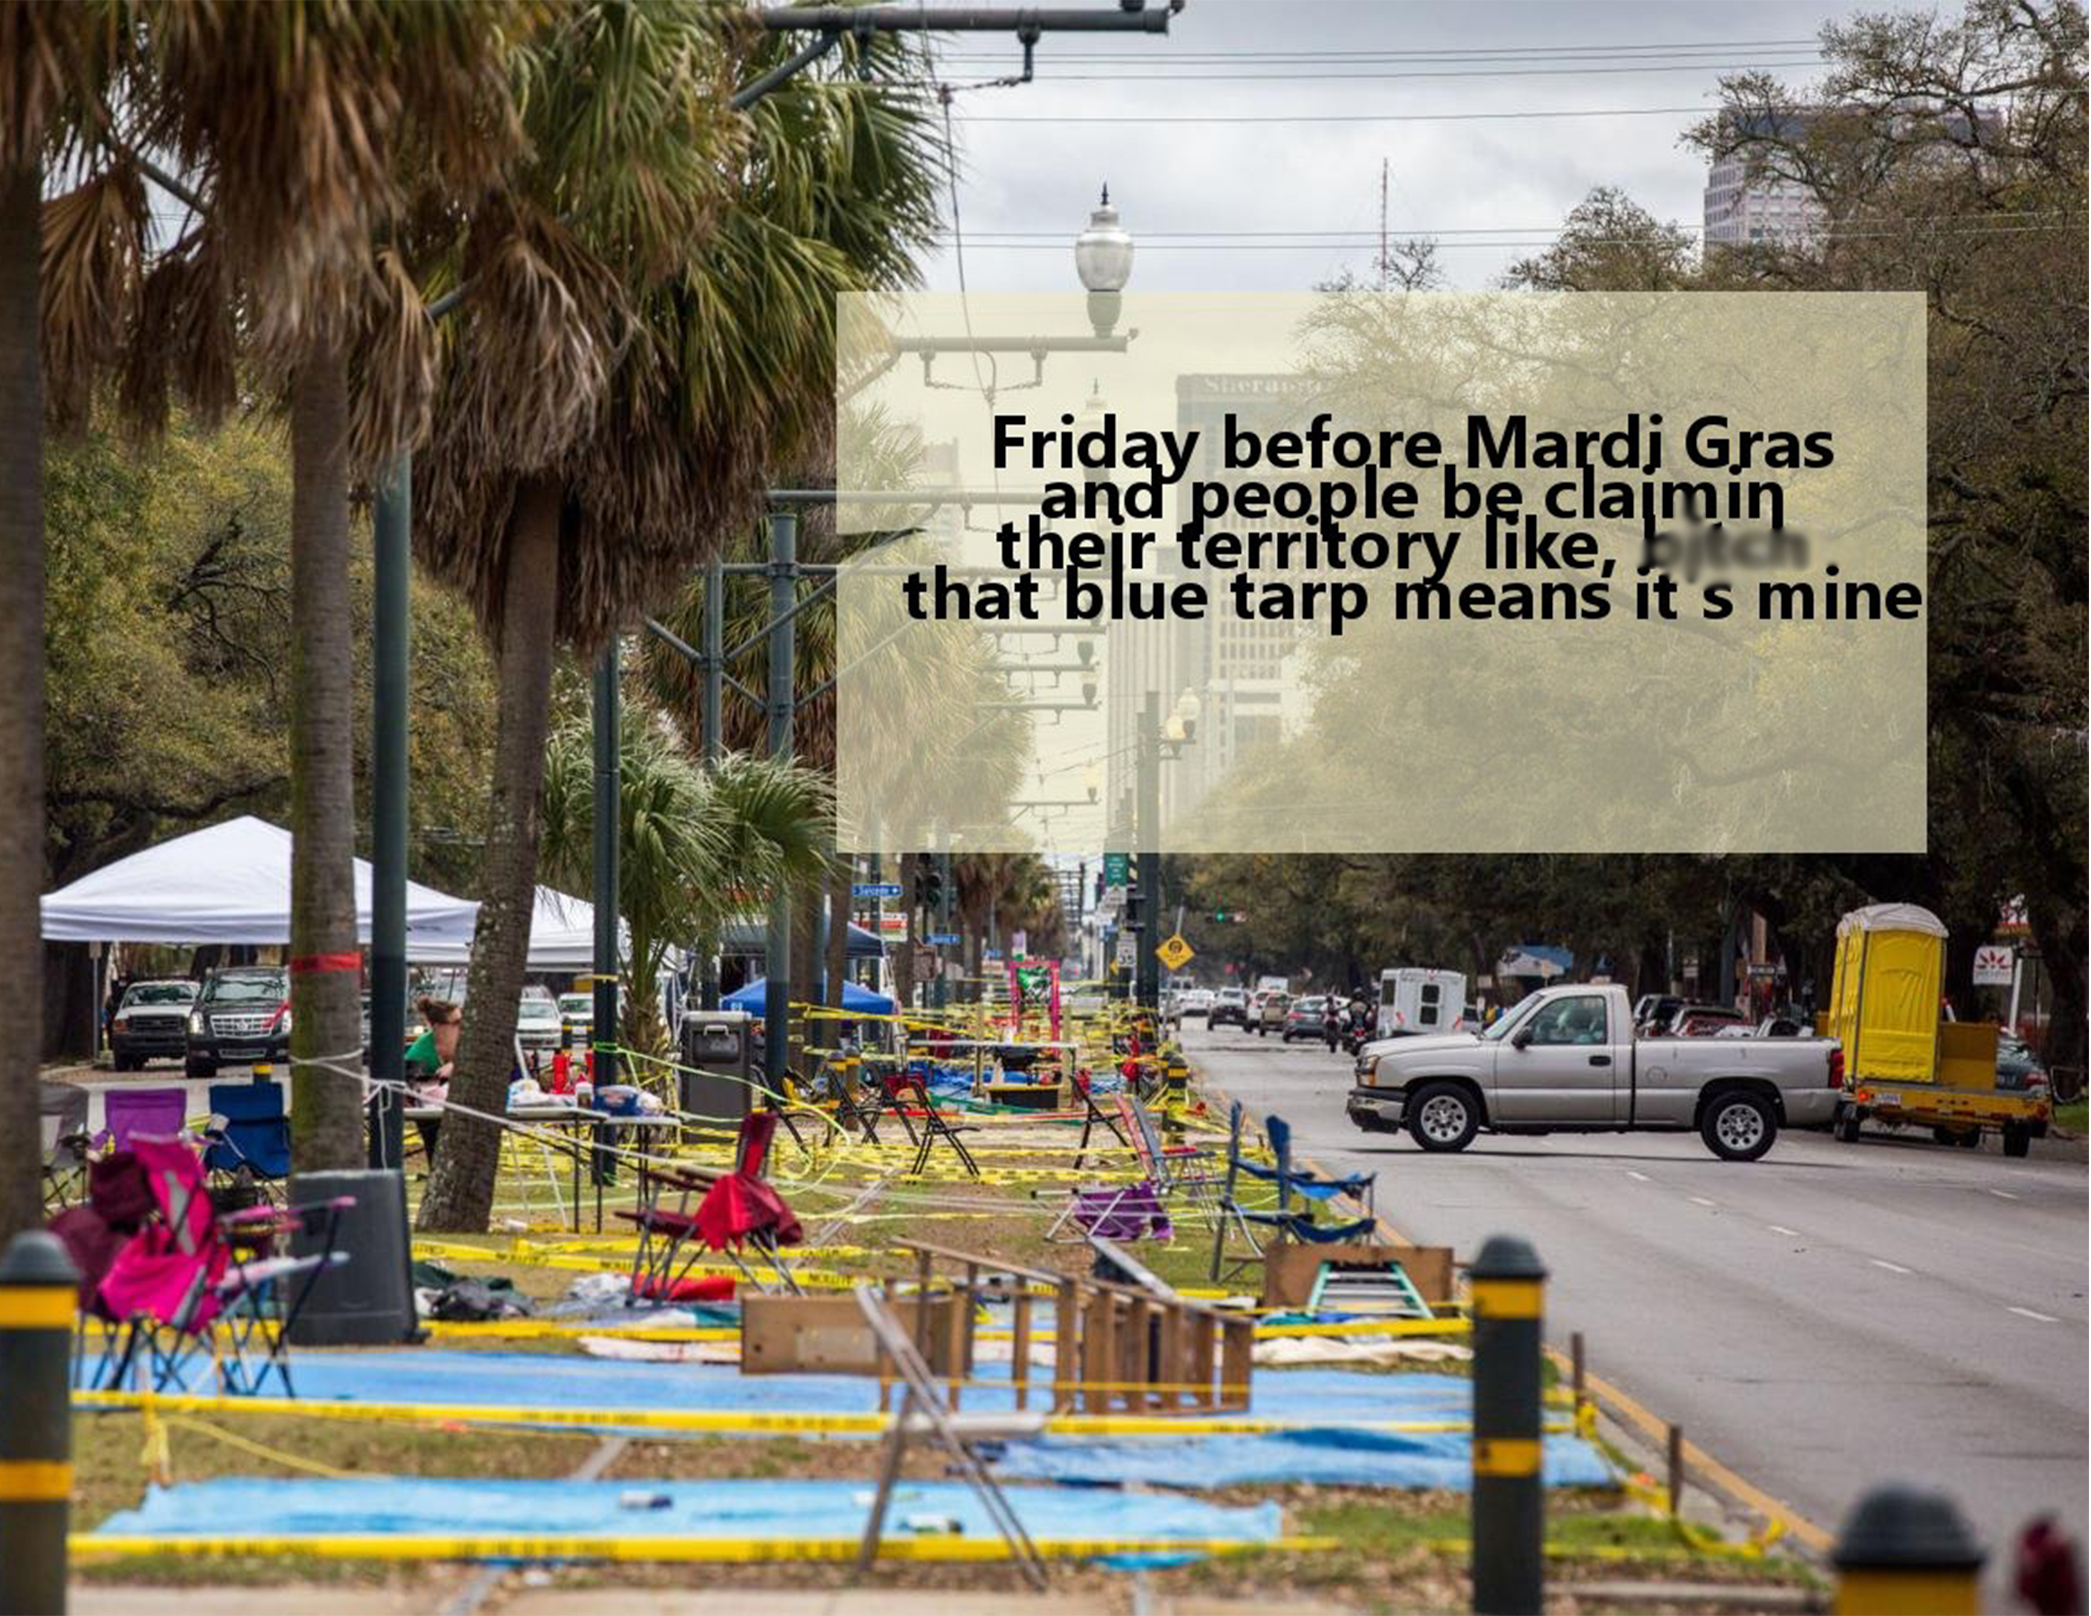 mardi gras photos - car - Friday before, Mardi Gras and people be claimin their territory , that blue tarp means it s mine 2